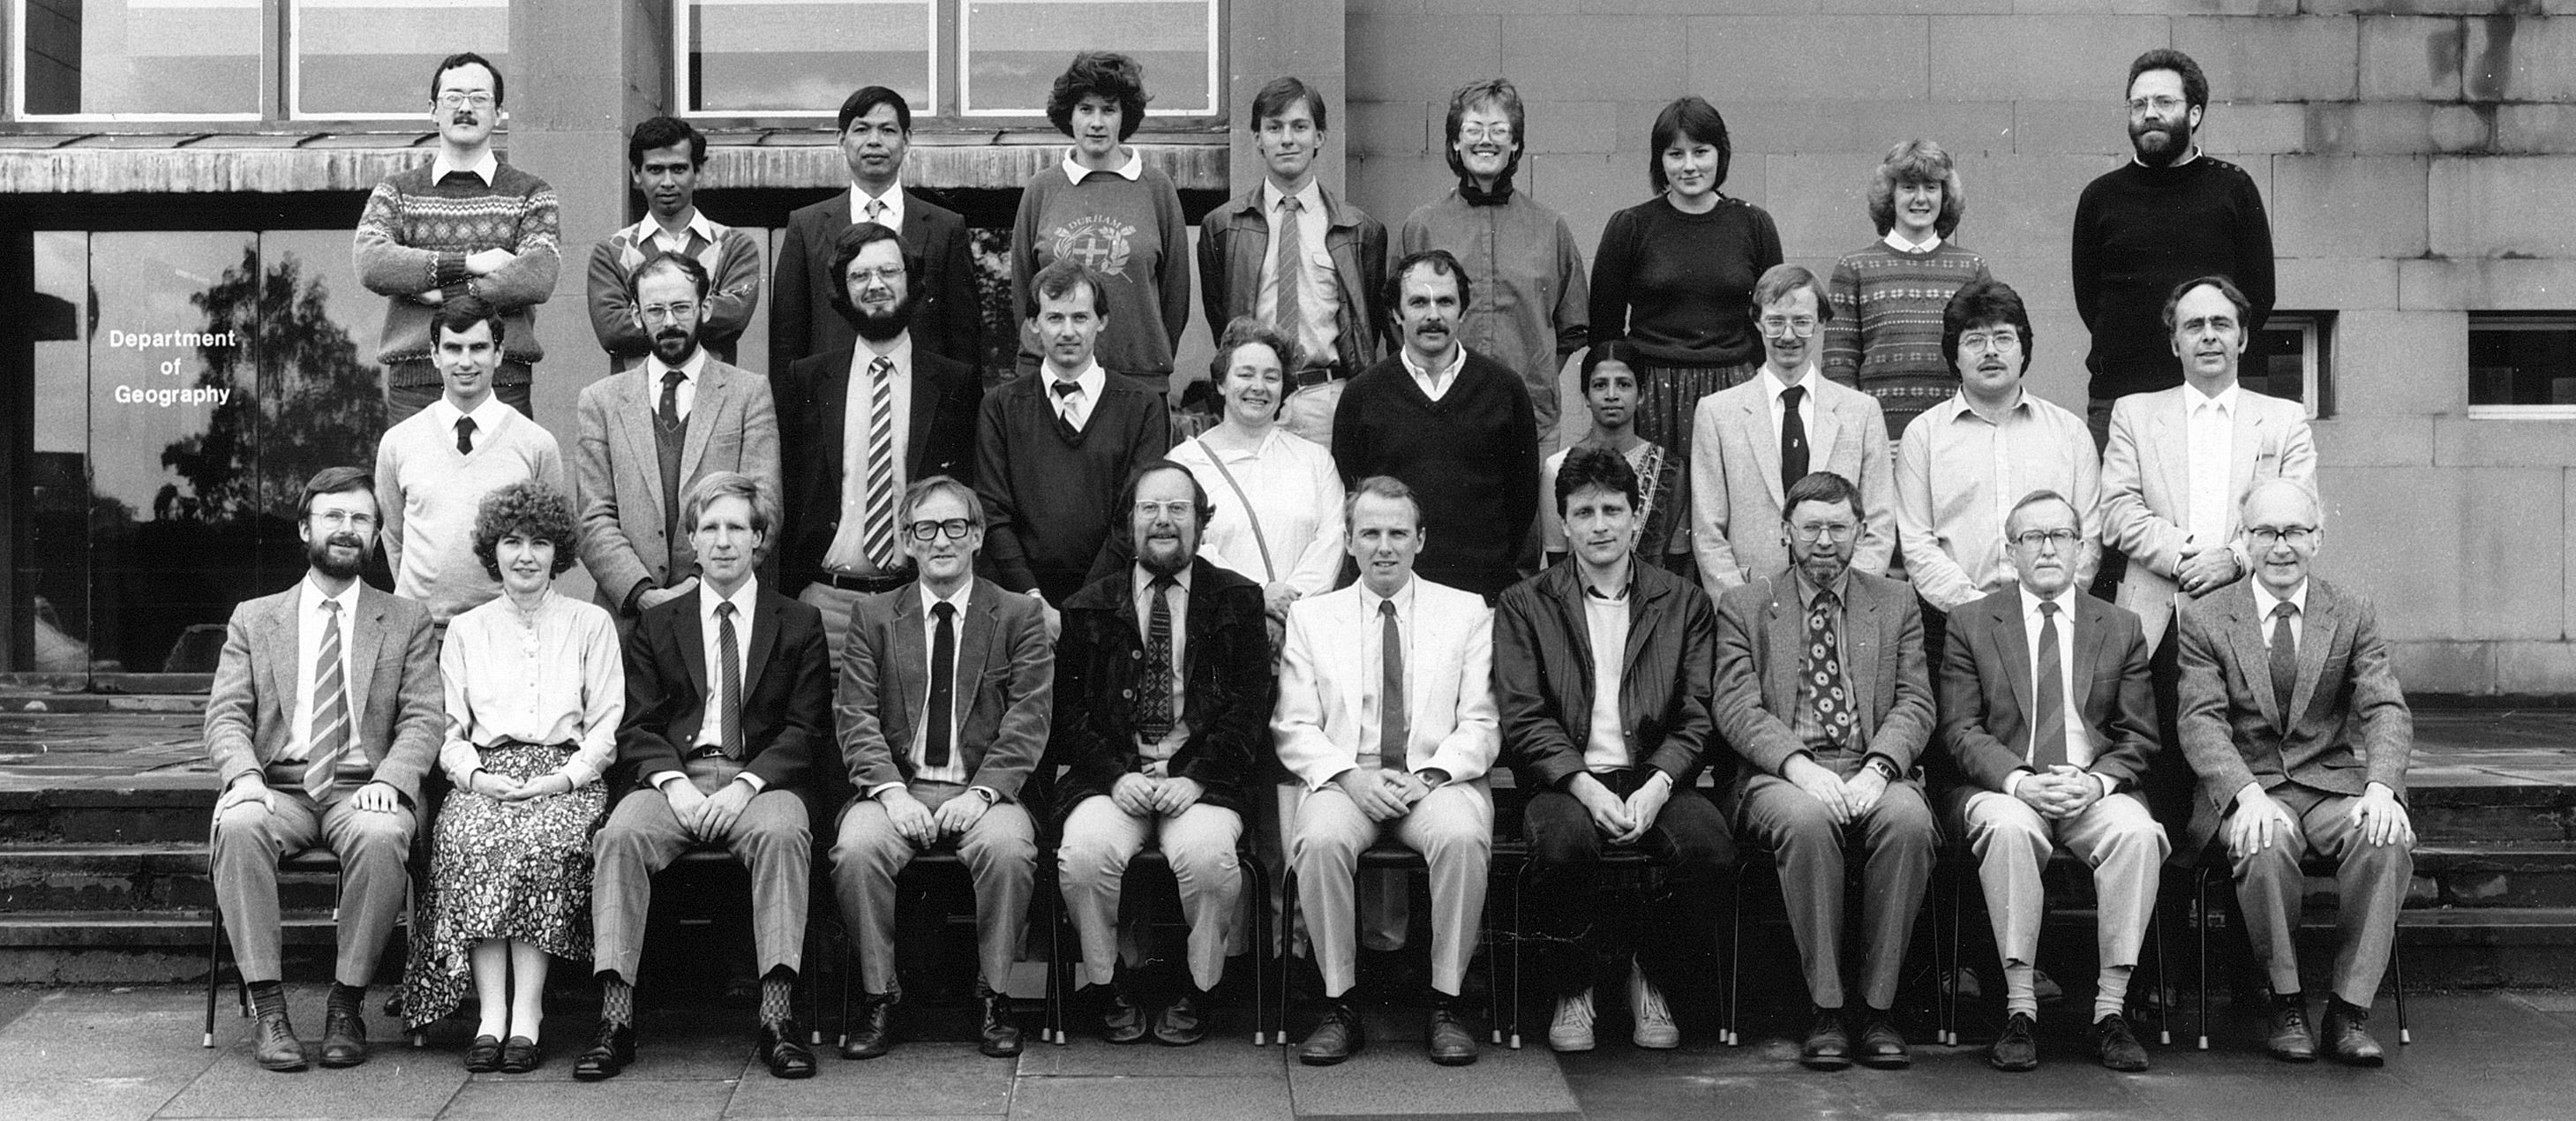 Geography Department Postgraduate Group Photo from 1985